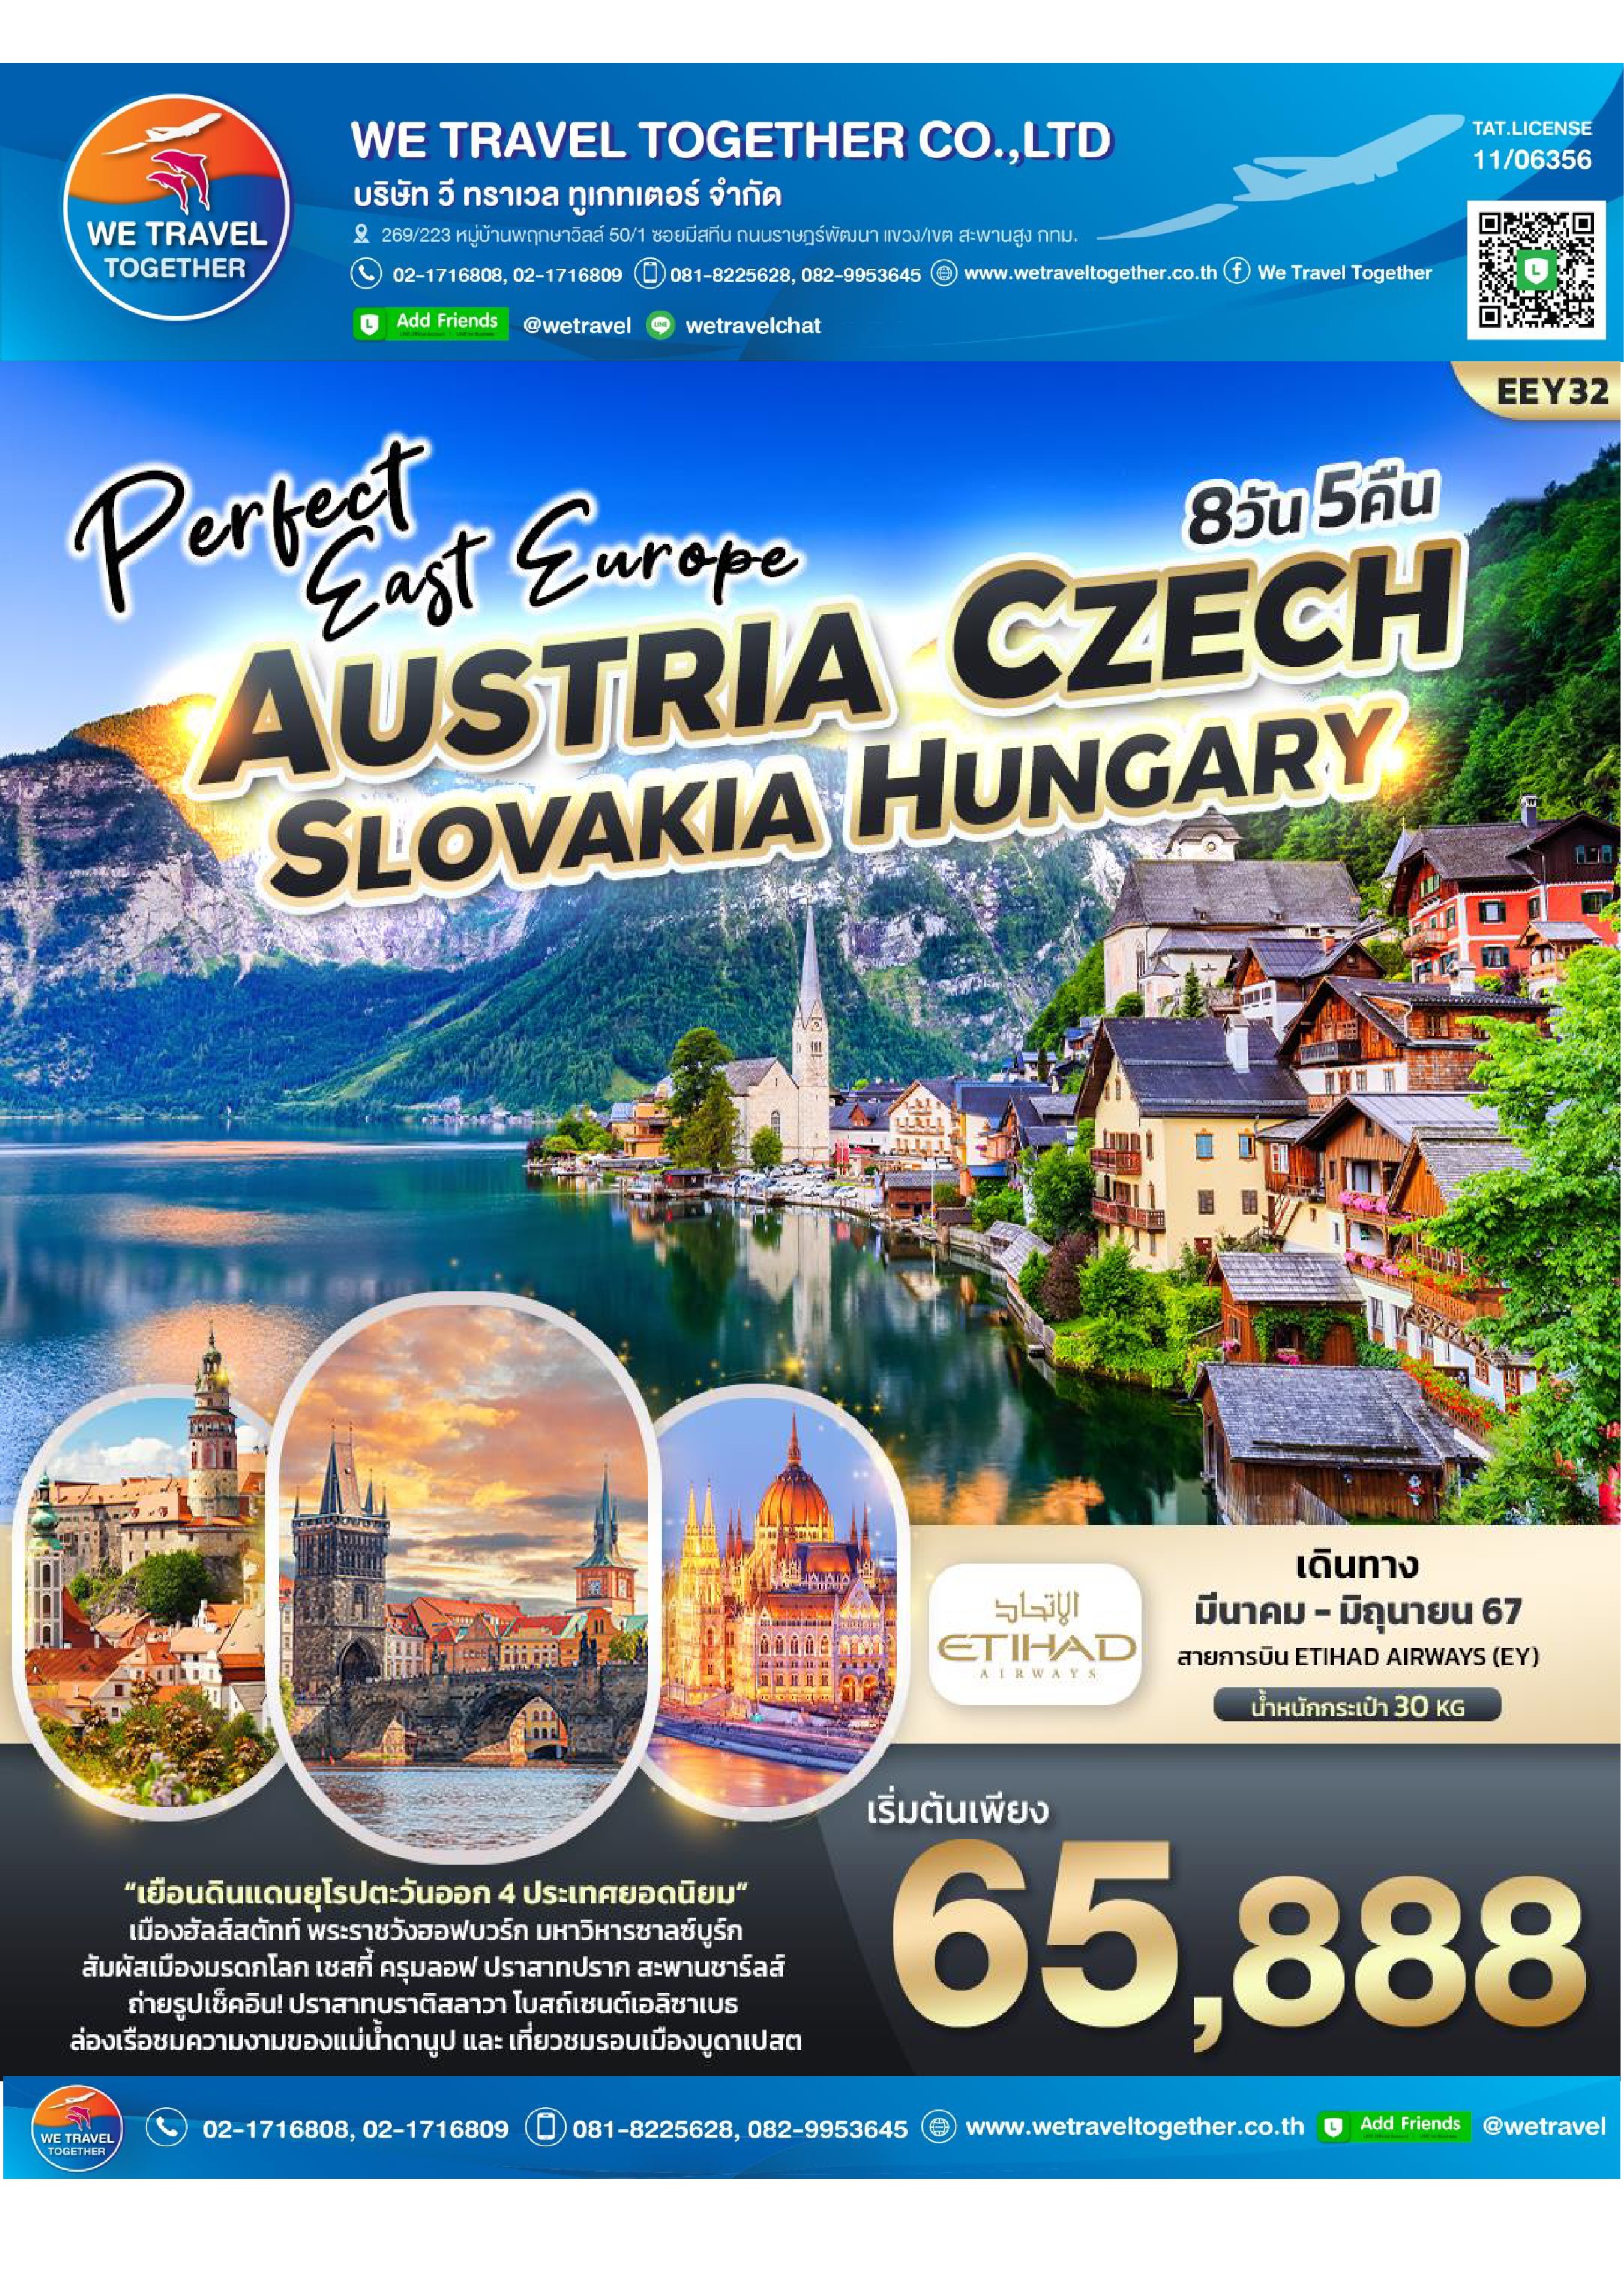 https://www.wetraveltogether.co.th/images/column_1706021503/EEY32-PERFECT EAST EUROPE.pdf